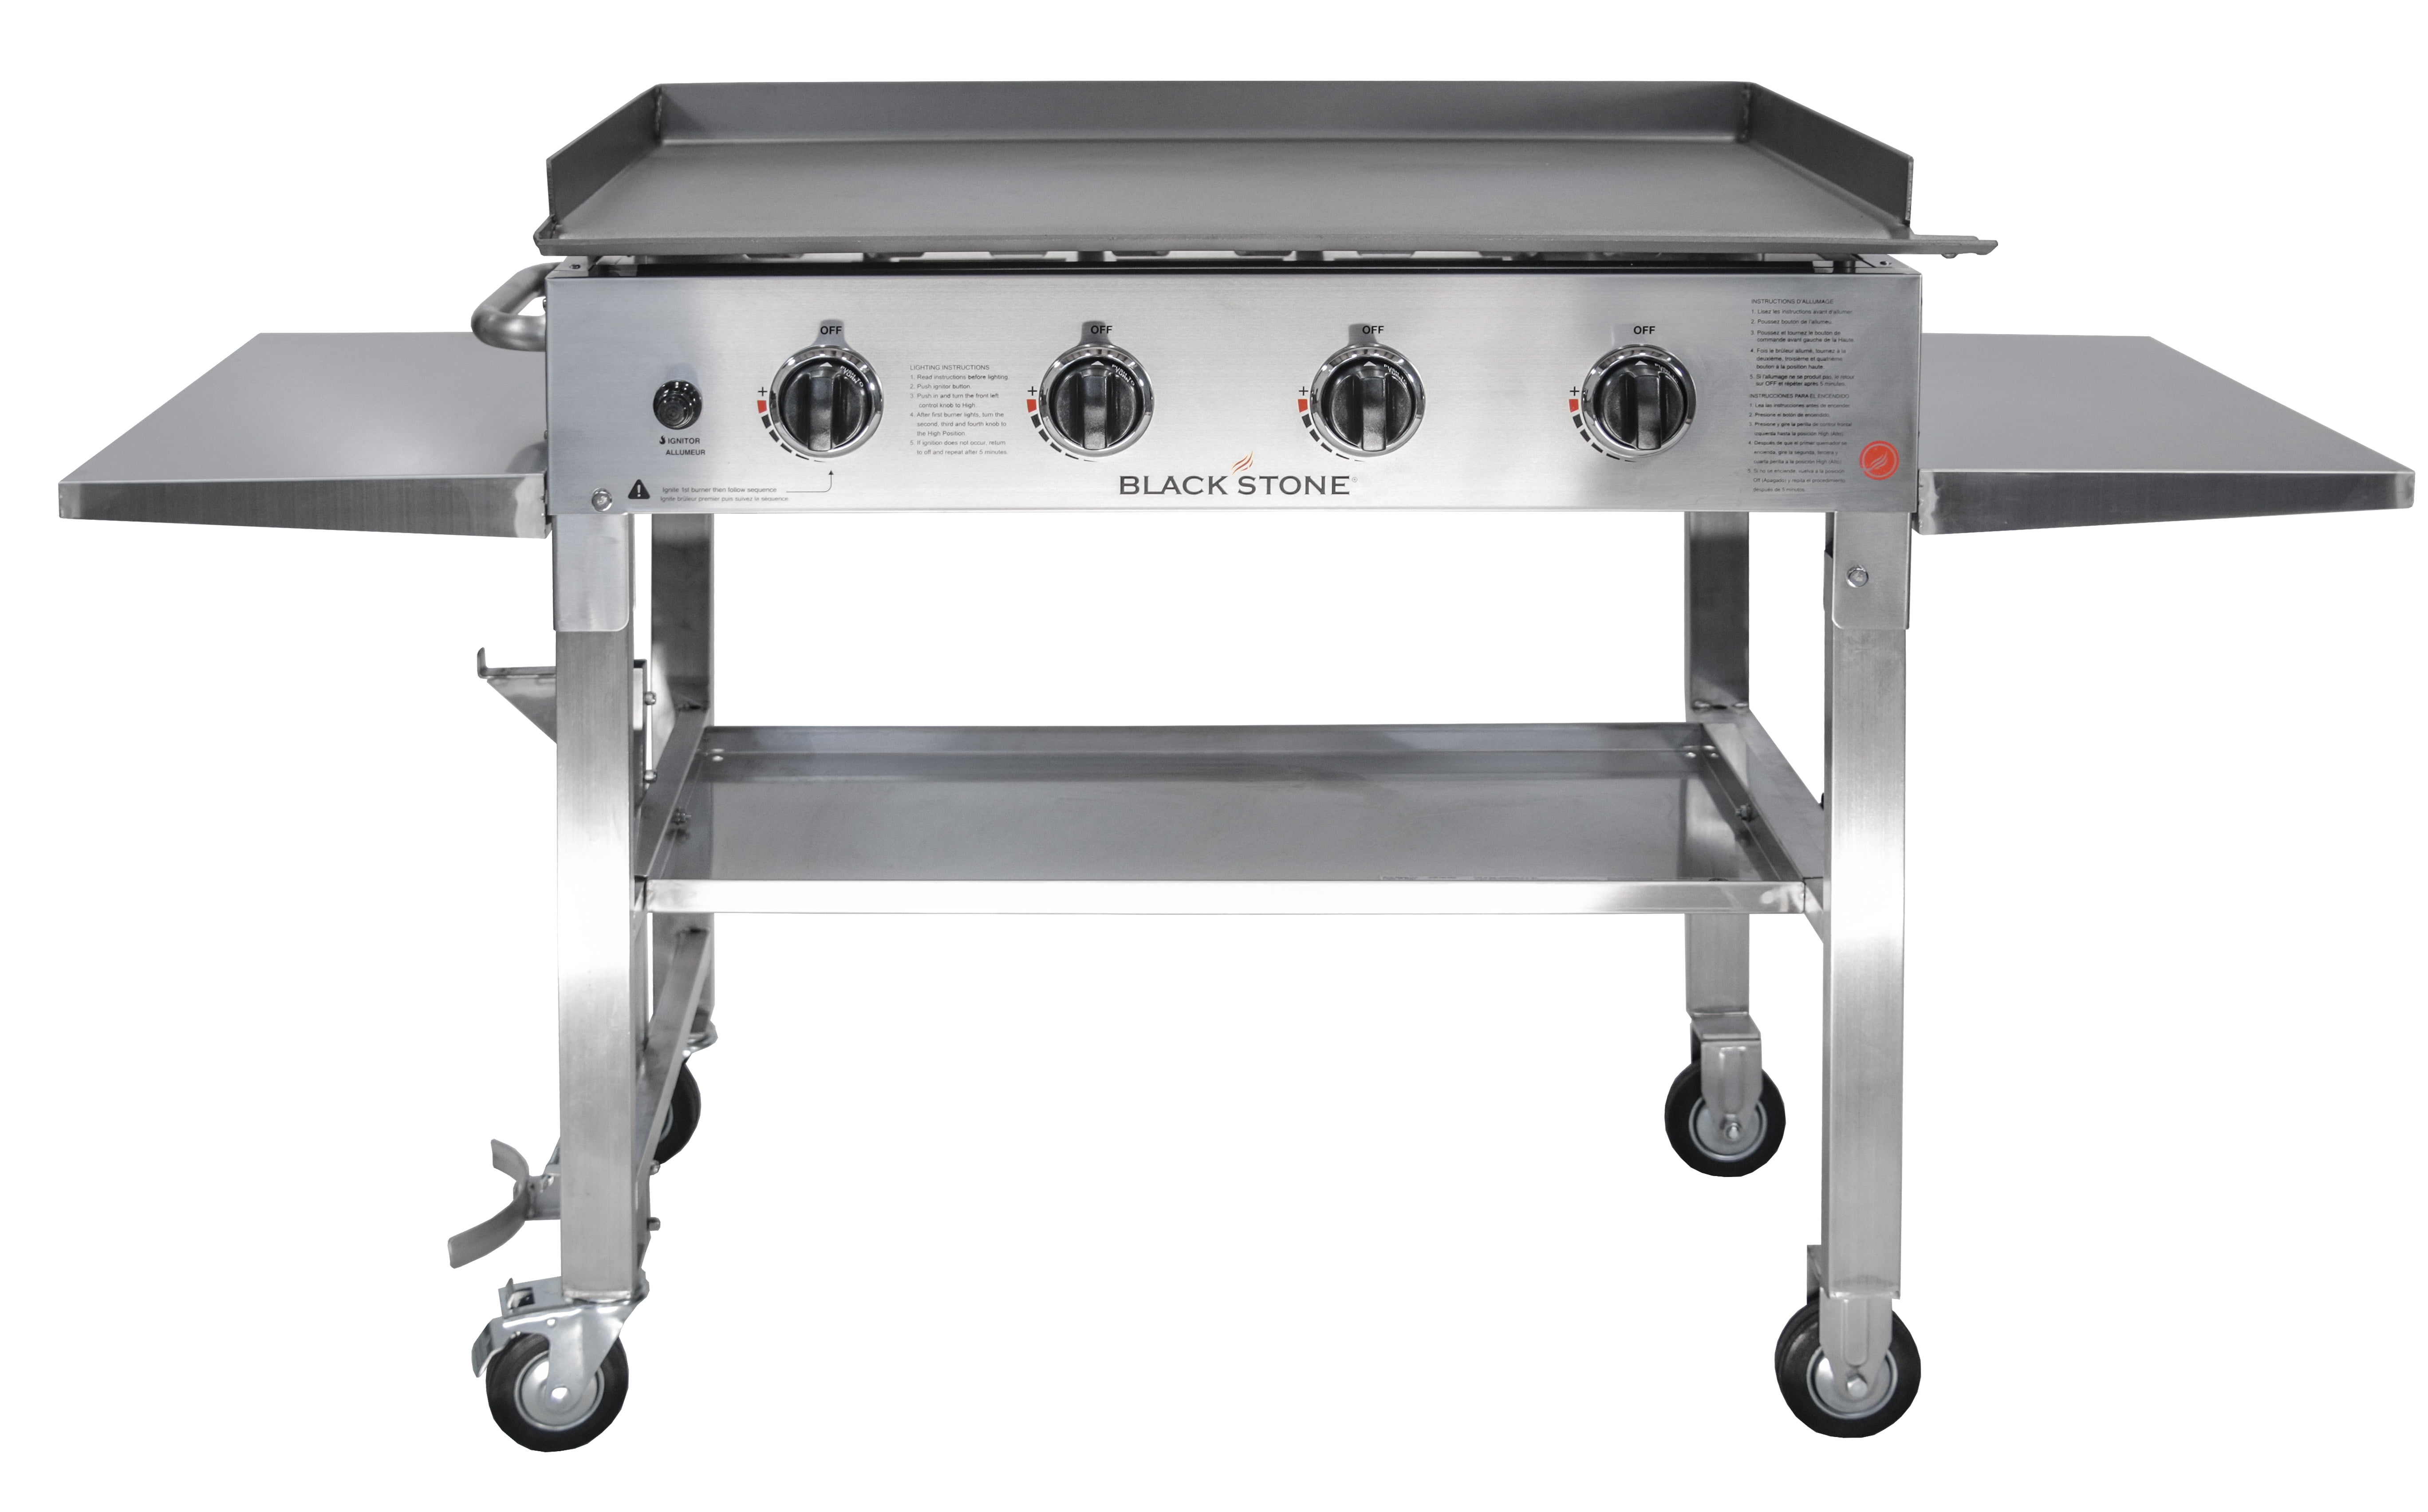 Blackstone Stainless Steel 36 Inch Griddle Cooking Station